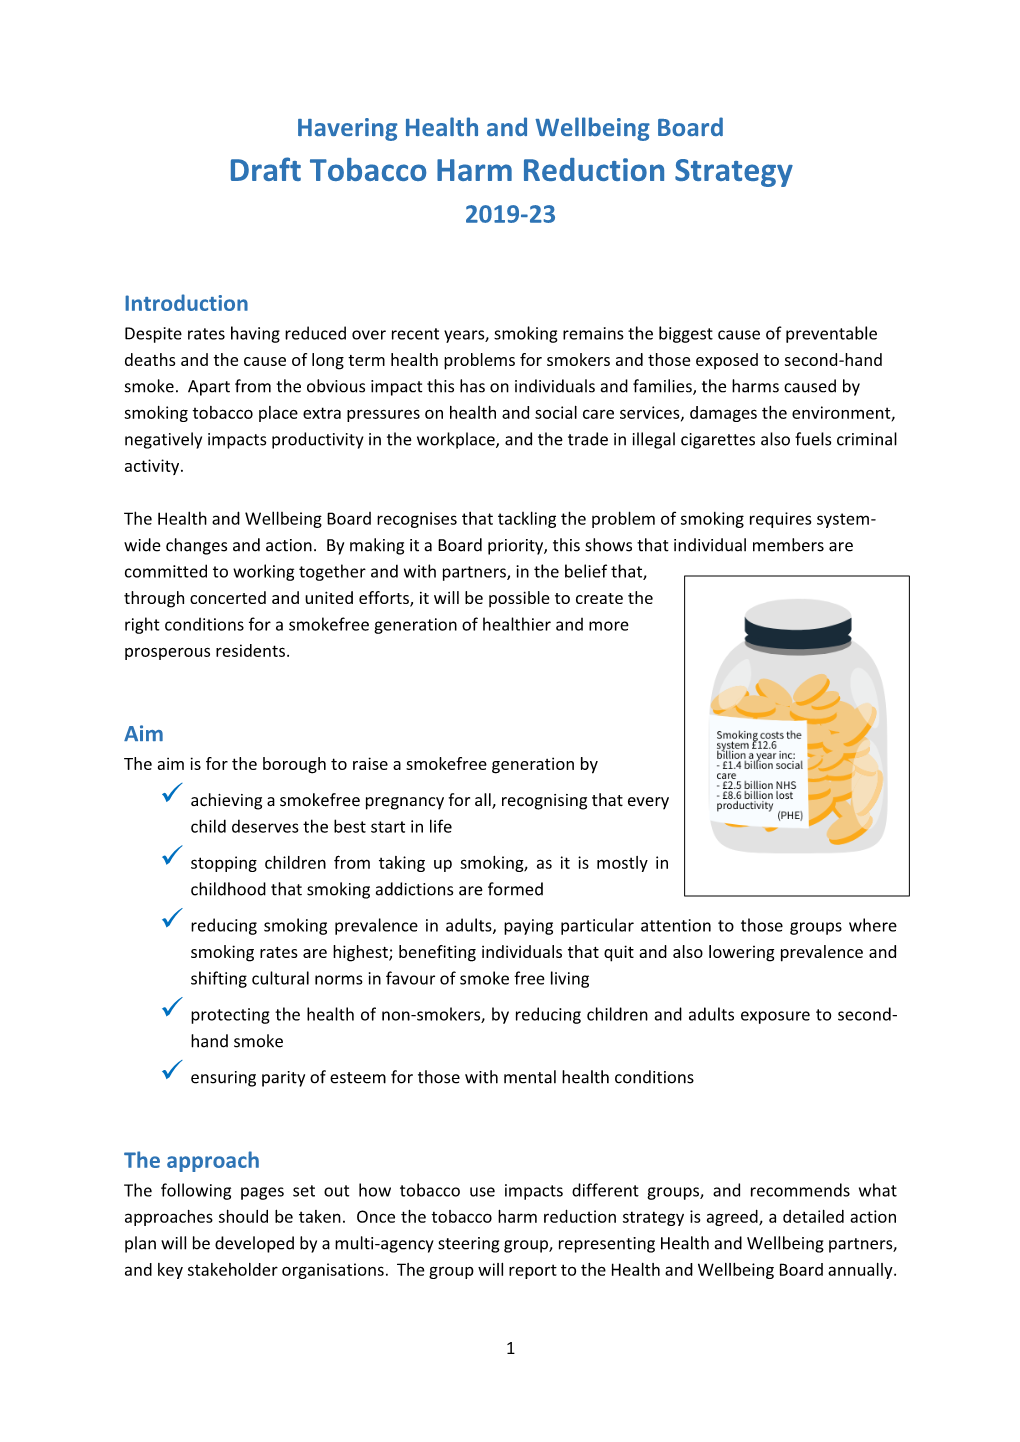 Draft Tobacco Harm Reduction Strategy 2019-23